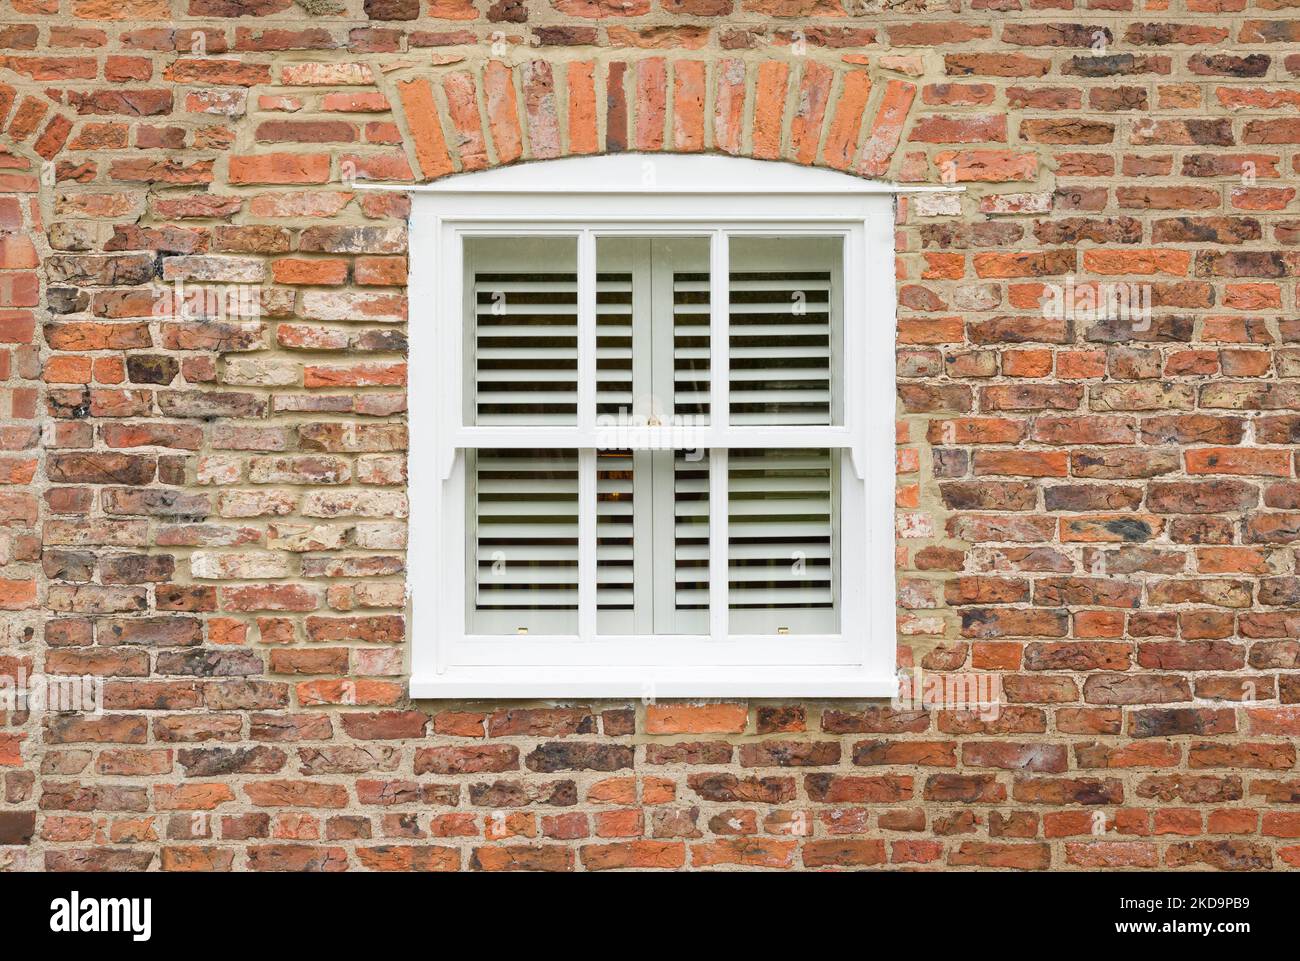 Exterior of old brick house with wooden sash window and wooden blinds, England, UK Stock Photo